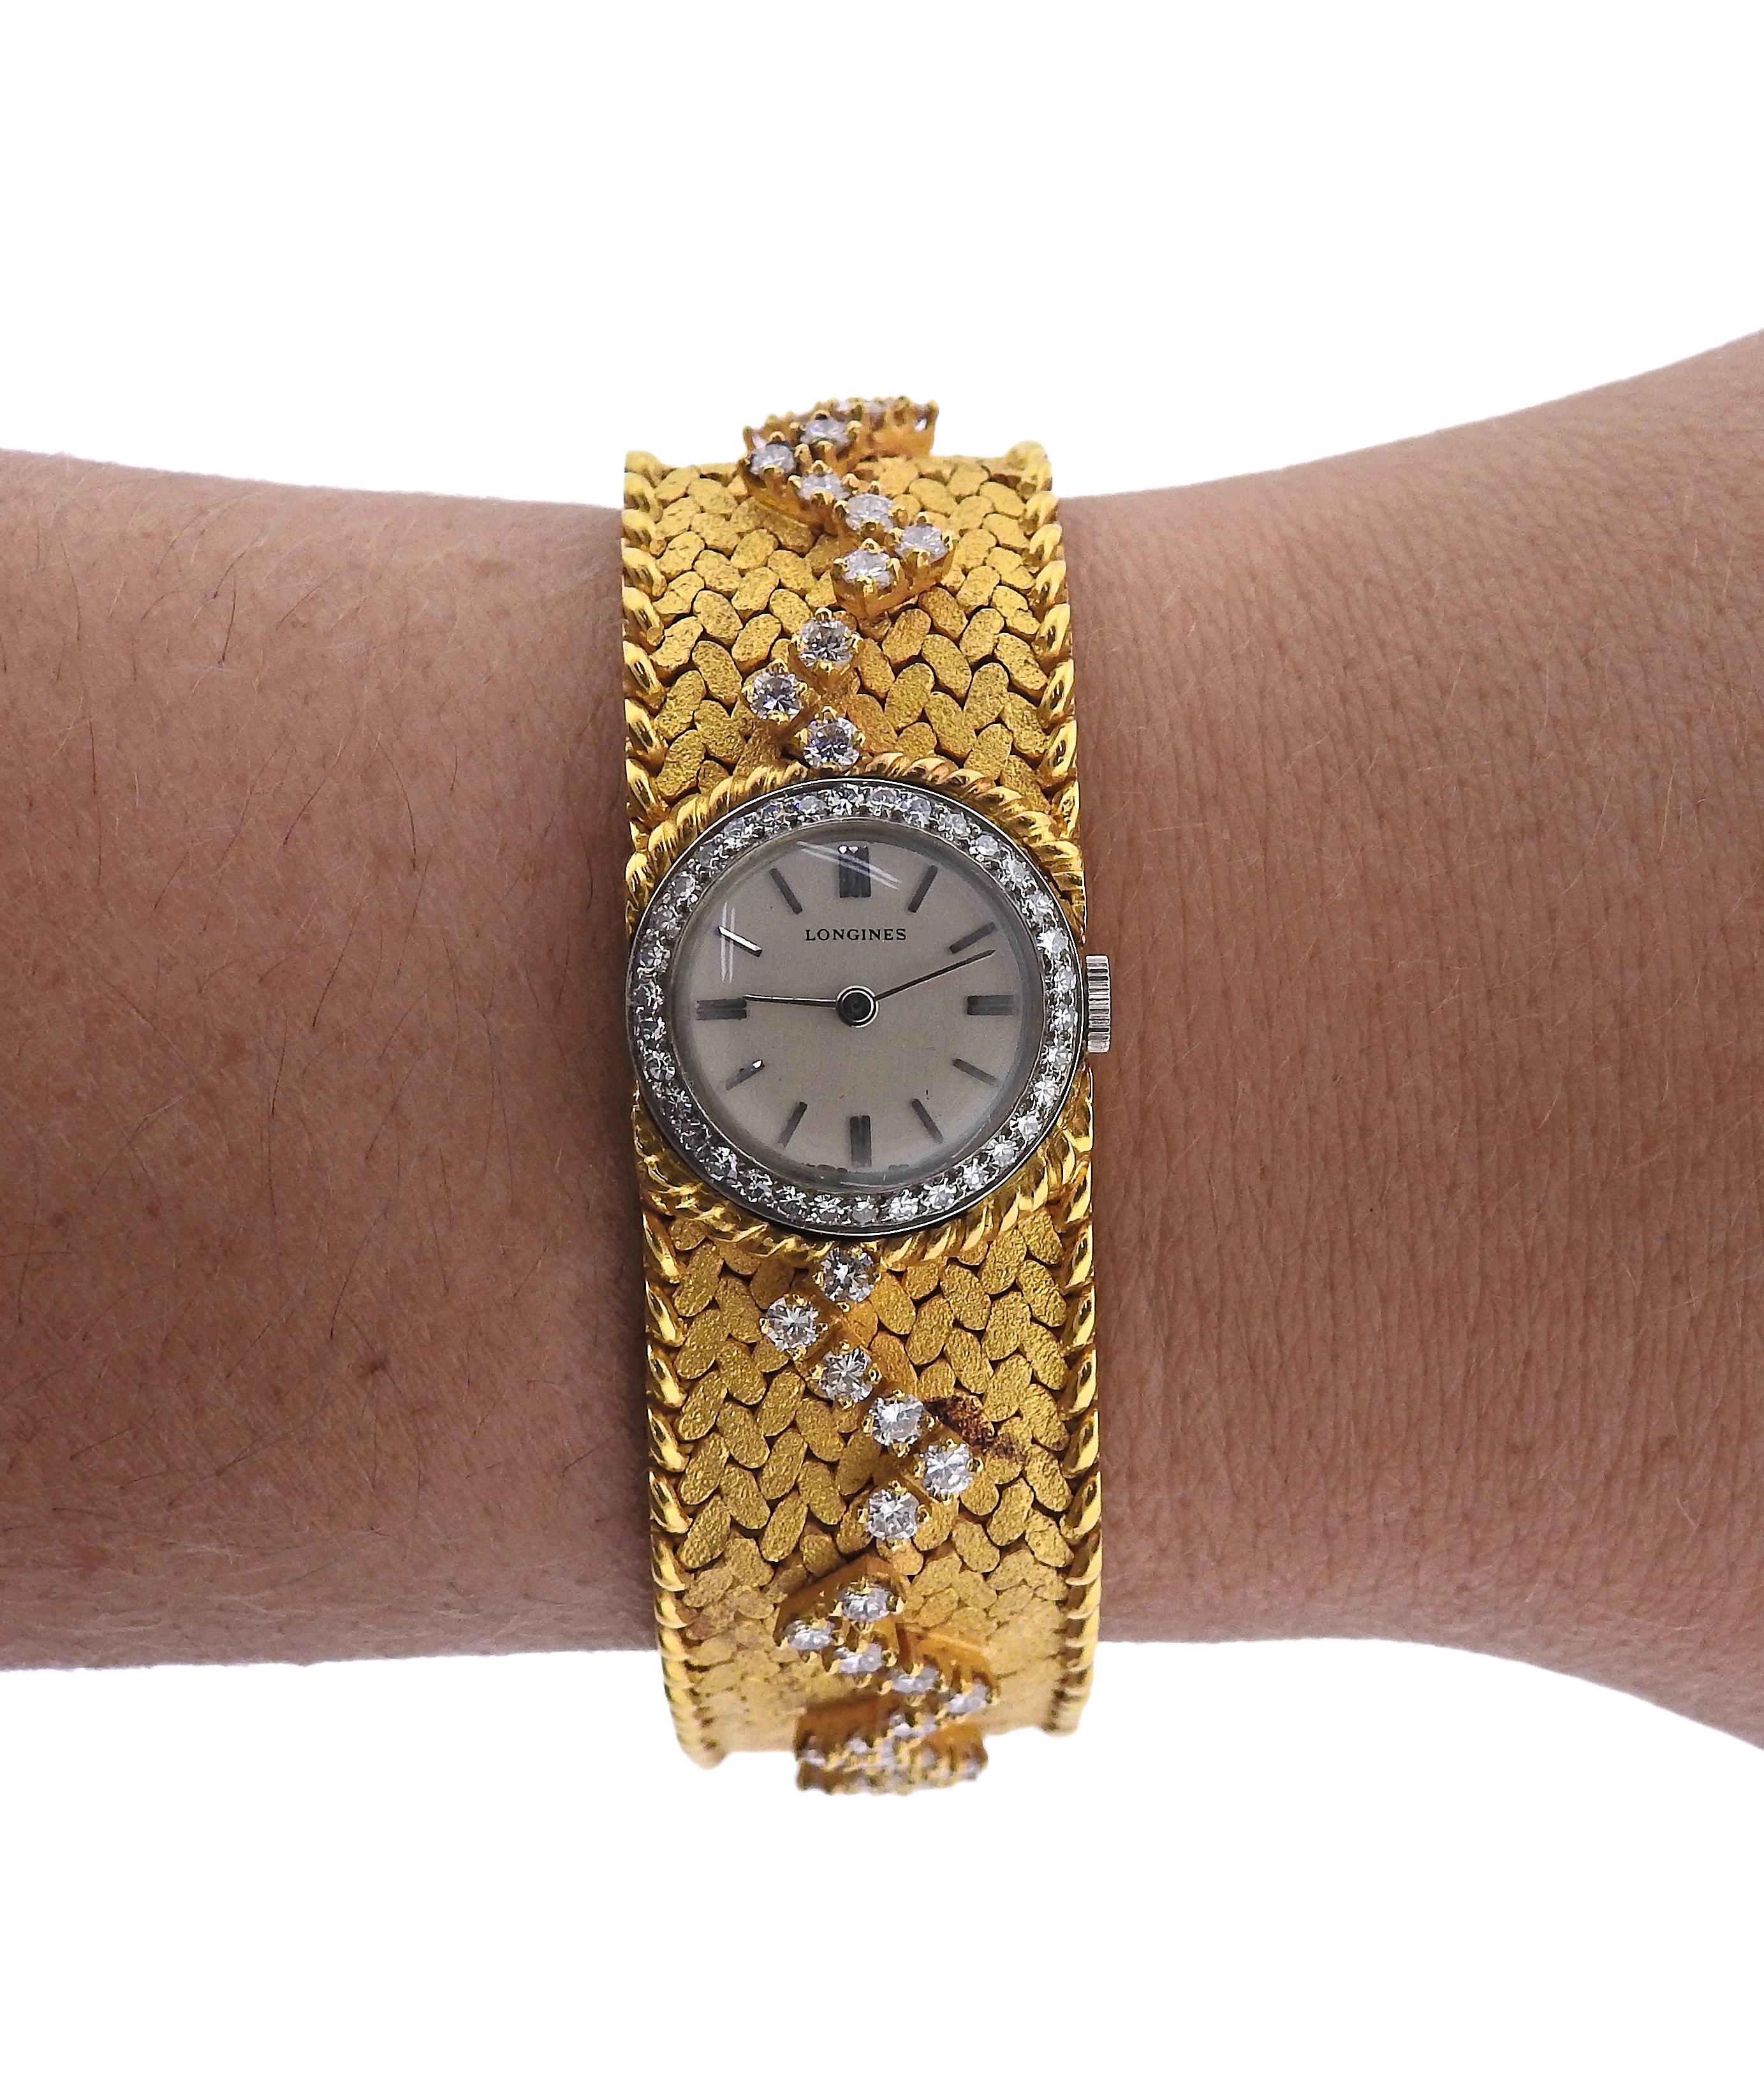 Cartier Longines Diamond Gold Watch Bracelet In Excellent Condition For Sale In New York, NY